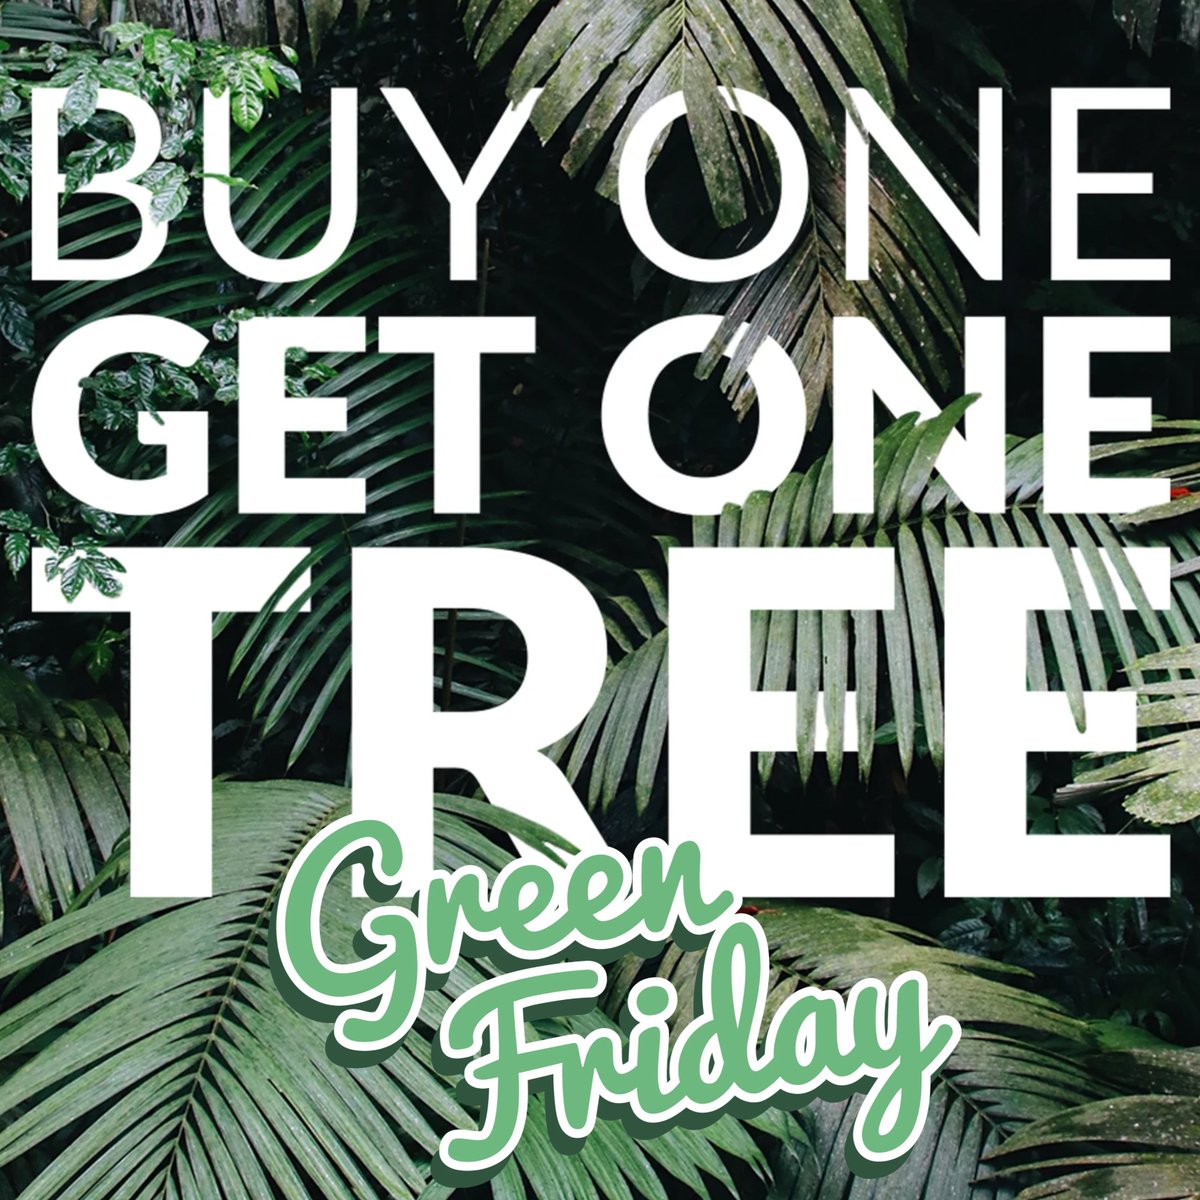 Black Friday is going Green everywhere! Spread the word! #greenfriday. 💚

Starting at 9am Friday we fund the planting of a tree with all orders you make. 🌱👏  

#buyonegetonetree #plantatree #treeplanting #treeplantation #treenation #sustainability #lovetrees #noblackfriday